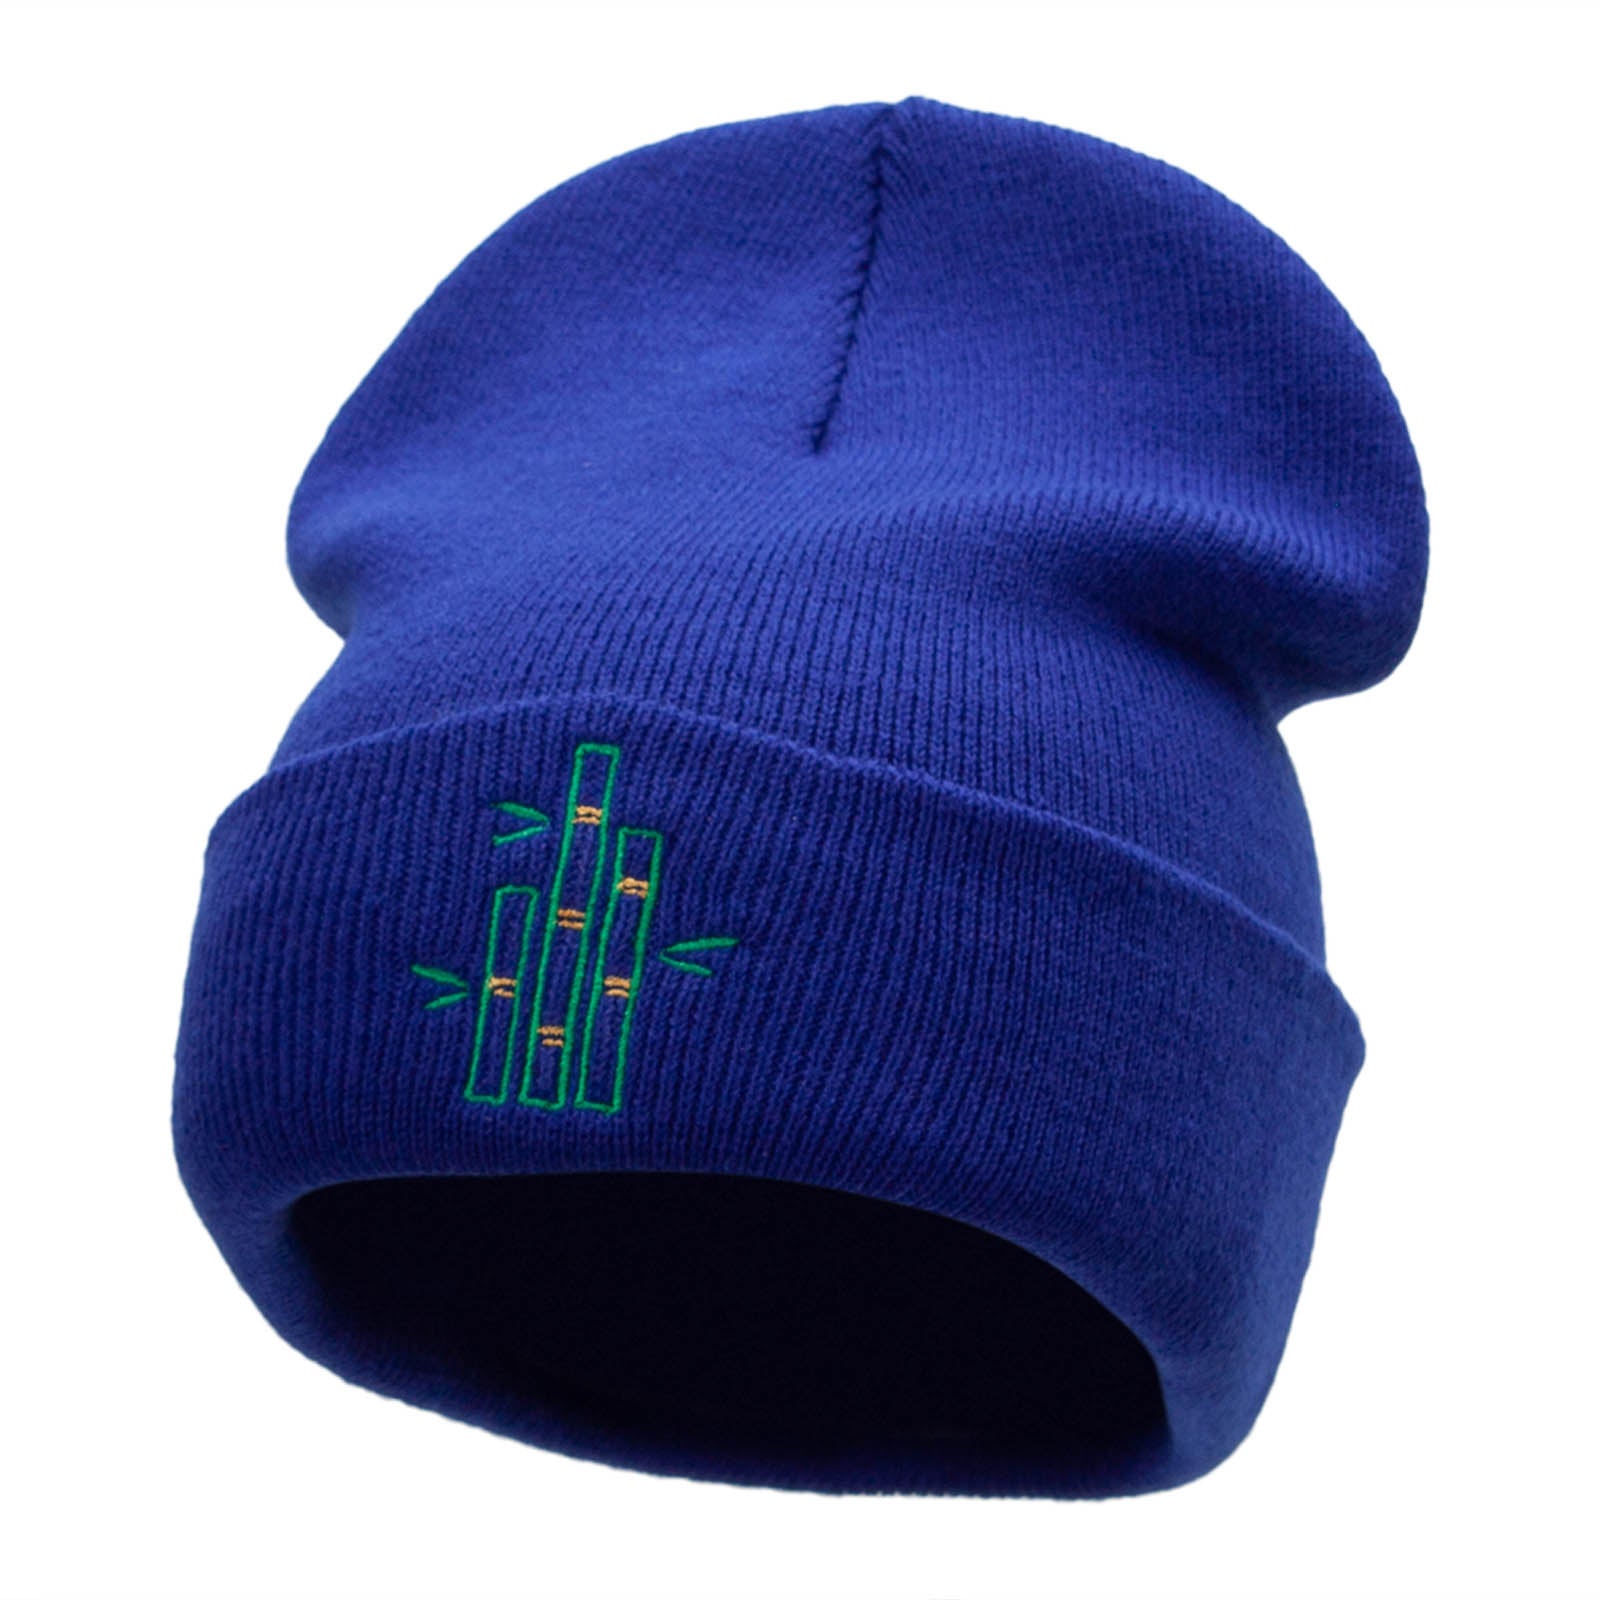 Bamboo Stalks Embroidered 12 Inch Long Knitted Beanie - Royal OSFM